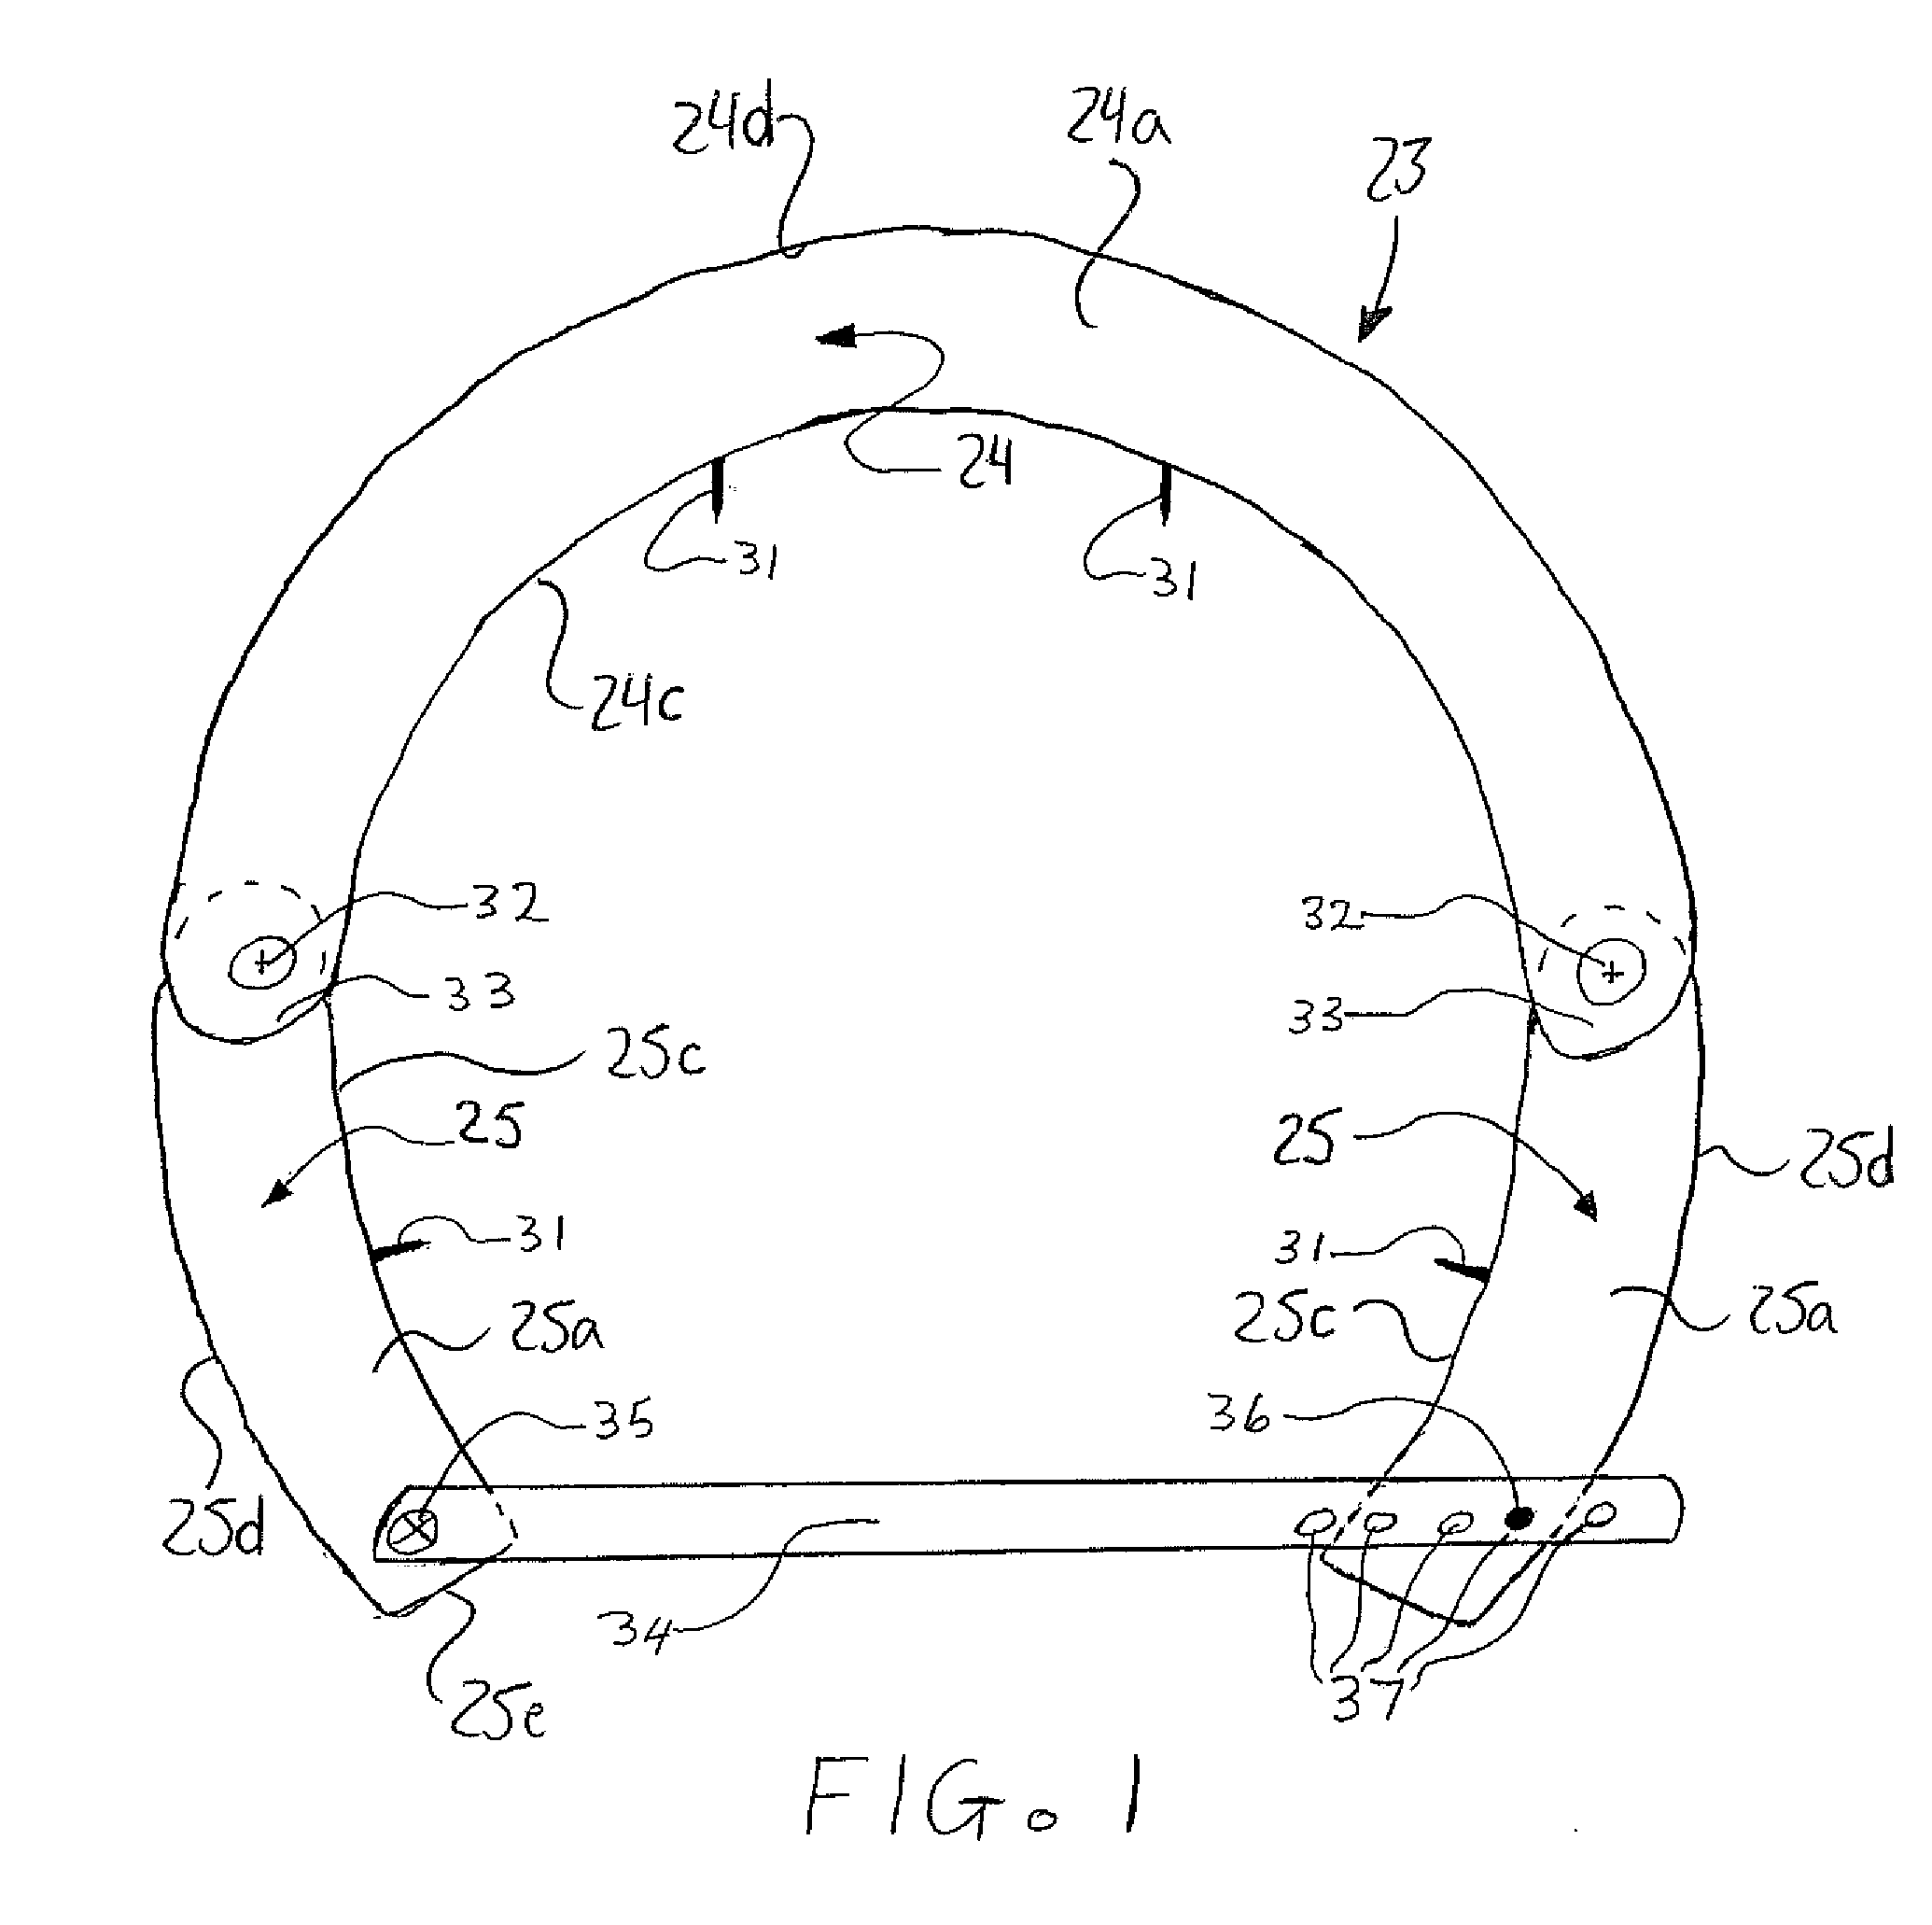 Template Device and Method for Trimming Equine Animal Hooves